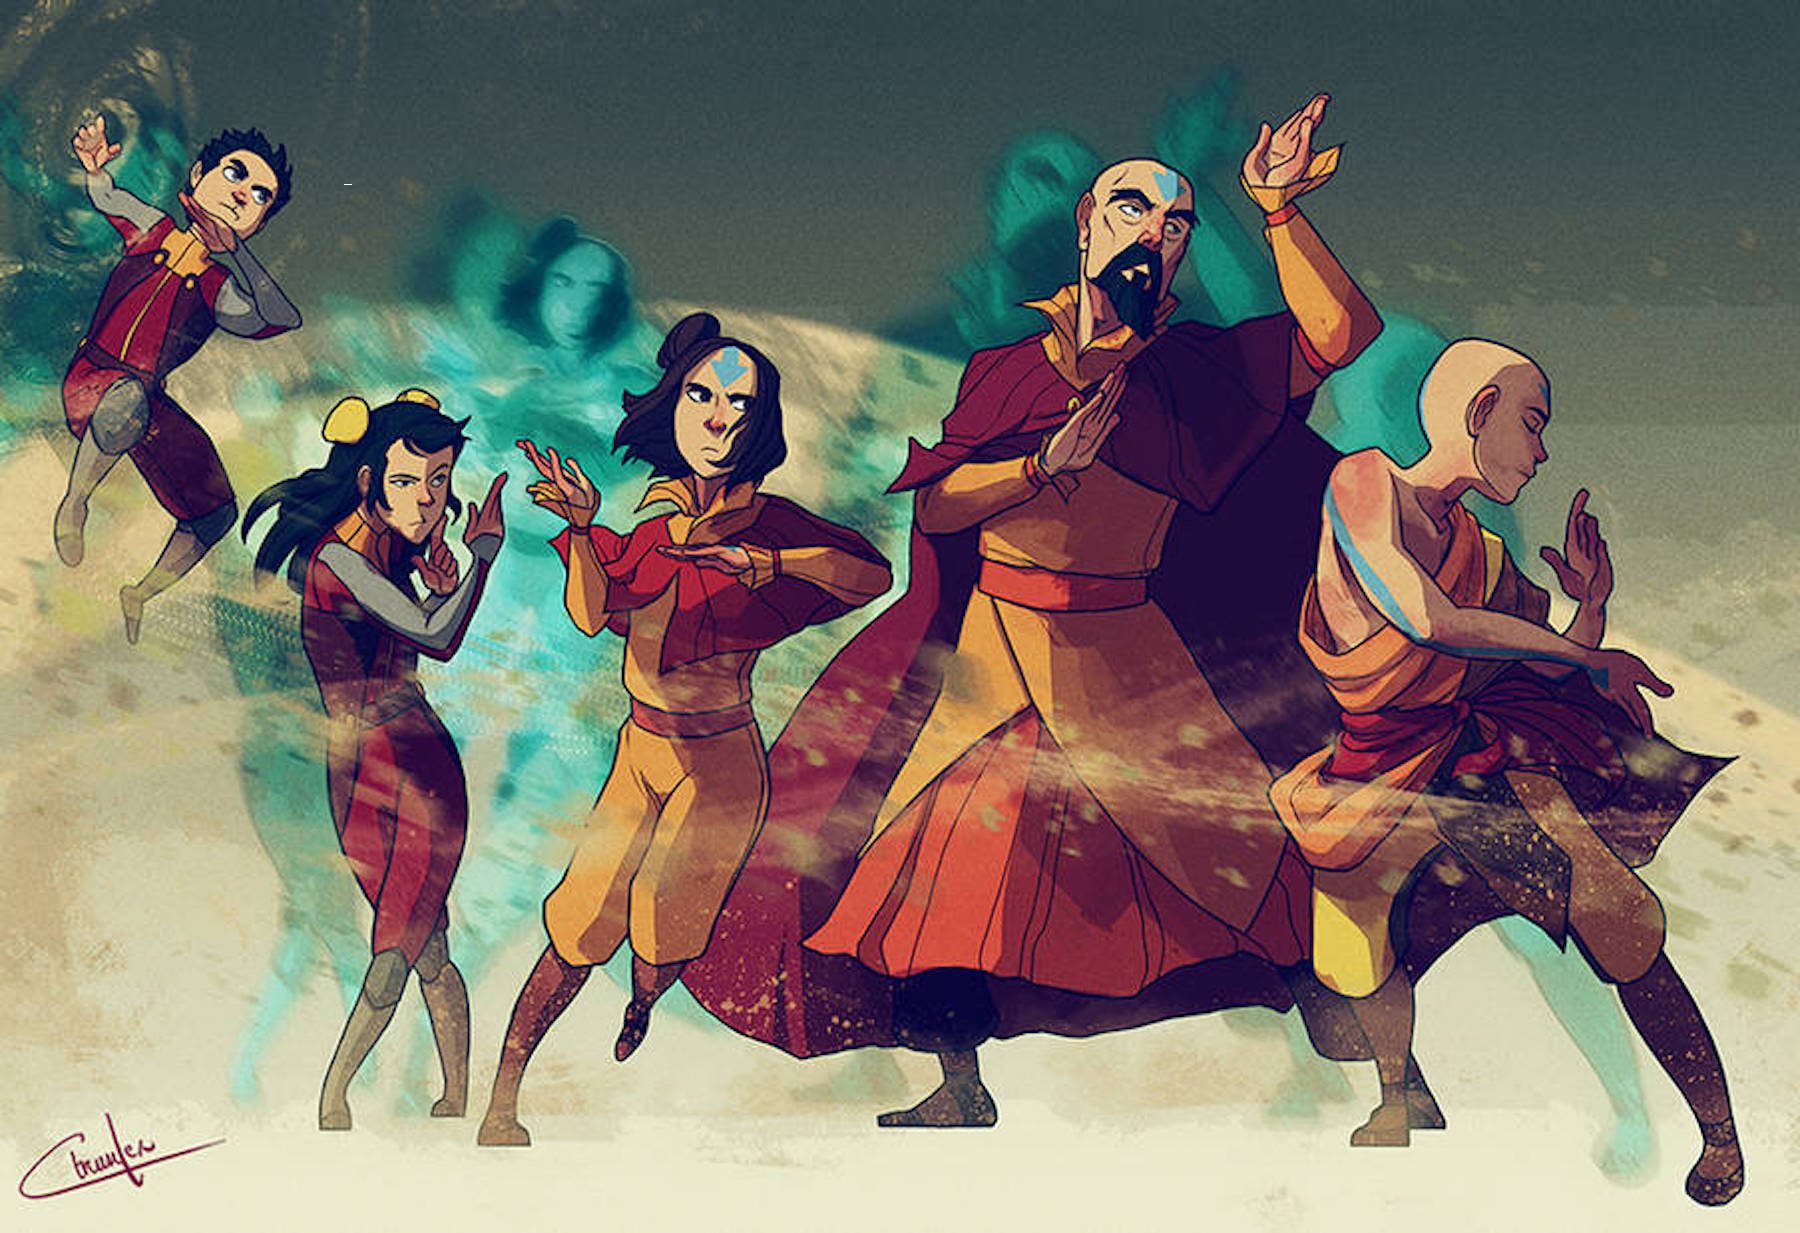 Airbending power from Avatar franchise.